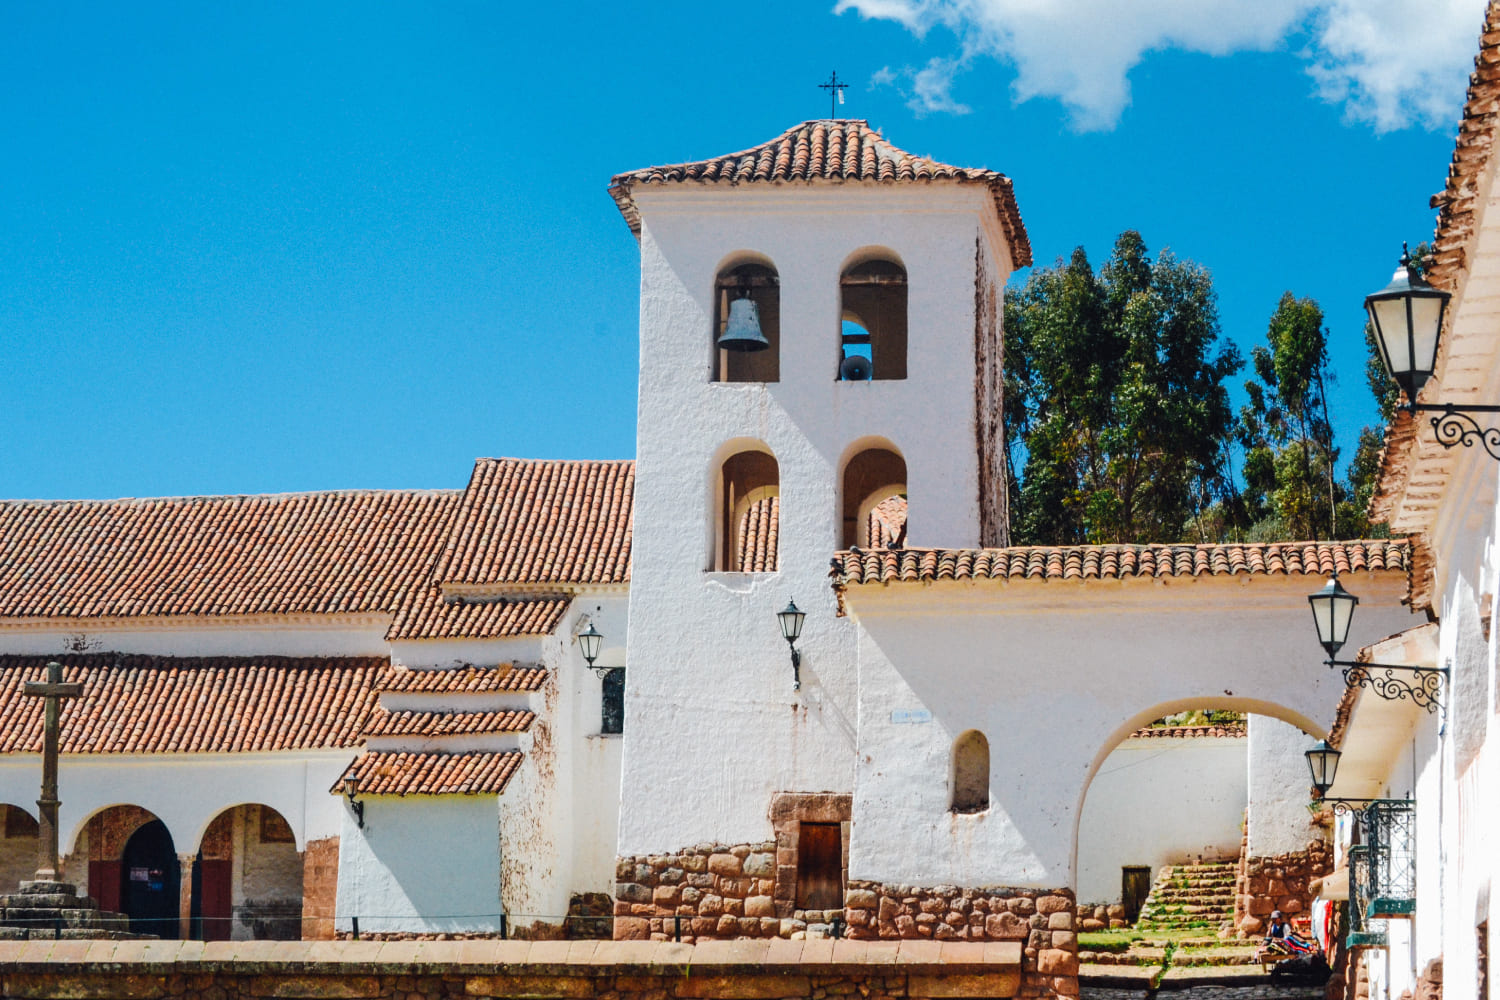 THE INCA PALACE AND THE COLONIAL CHURCH